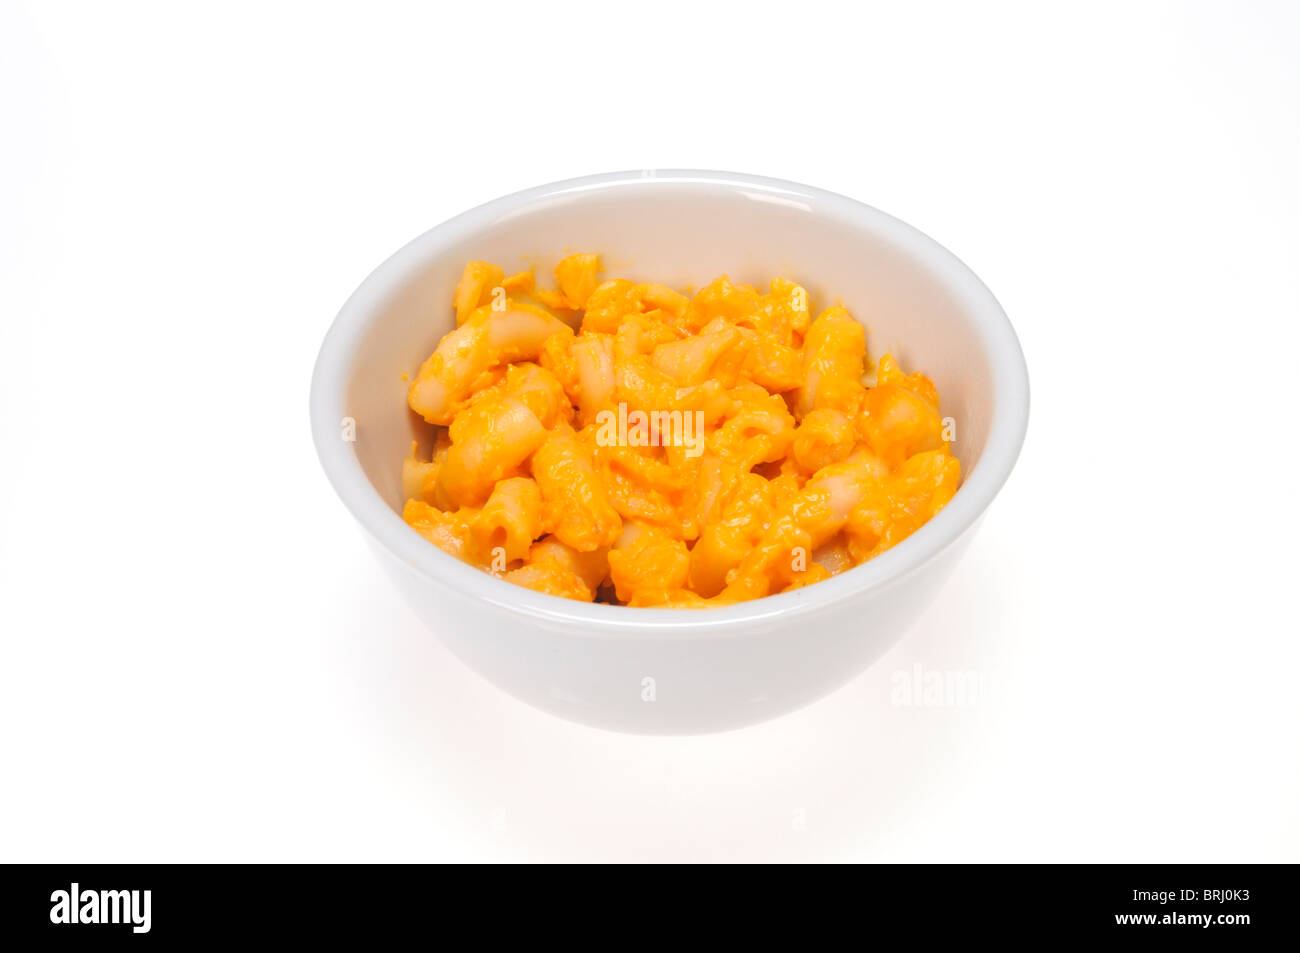 Cooked frozen macaroni and cheese in white bowl on white background cutout. Stock Photo